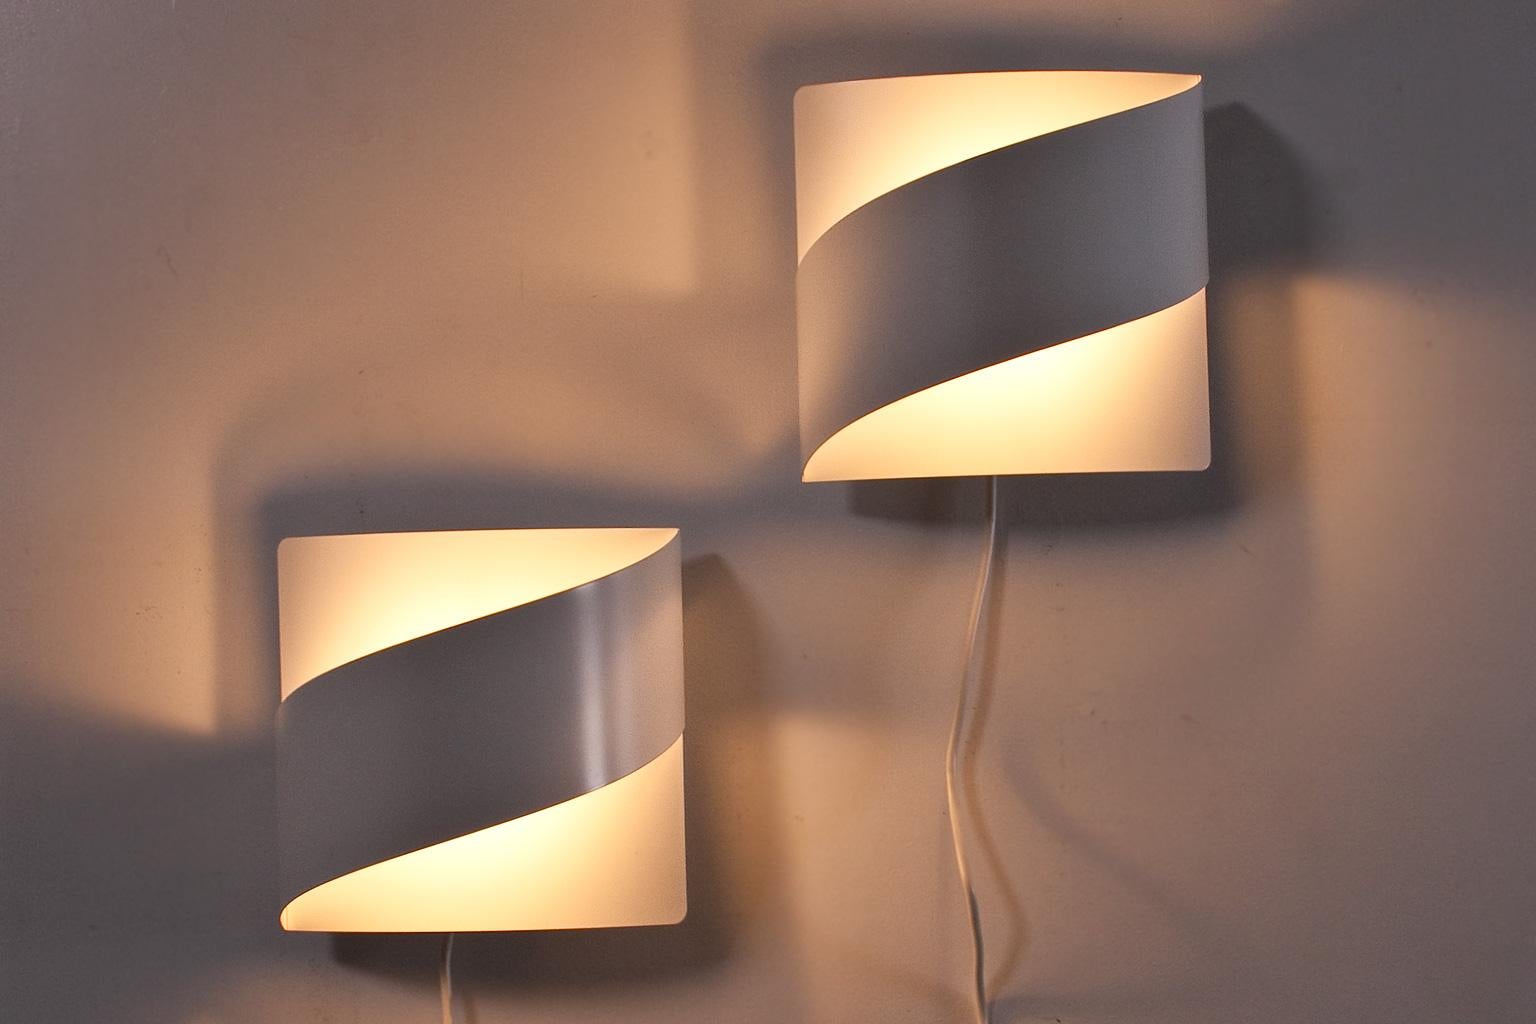 Elegant set of bent metal wall lights produced by Fagerhults Belysning AB in Sweden and designed by Peter Celsing 1960s/1970s. The items show case a beautiful light and shadow play on the wall when lighted. Label manufactured present.

Porcelain